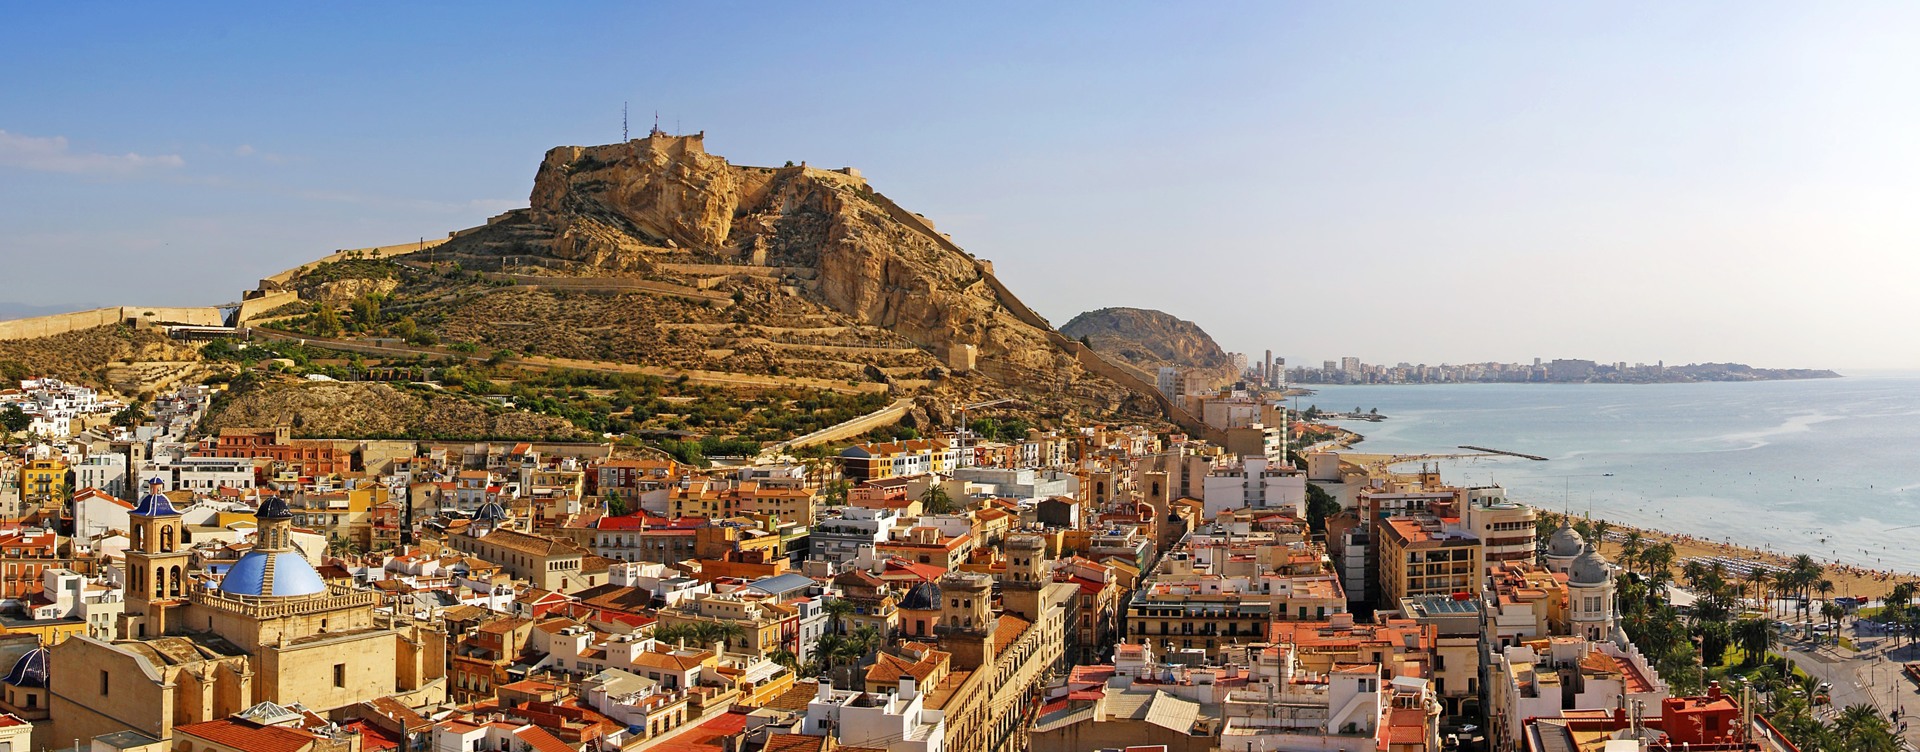 Discover the must-dos in Alicante
to make your holiday unforgettable